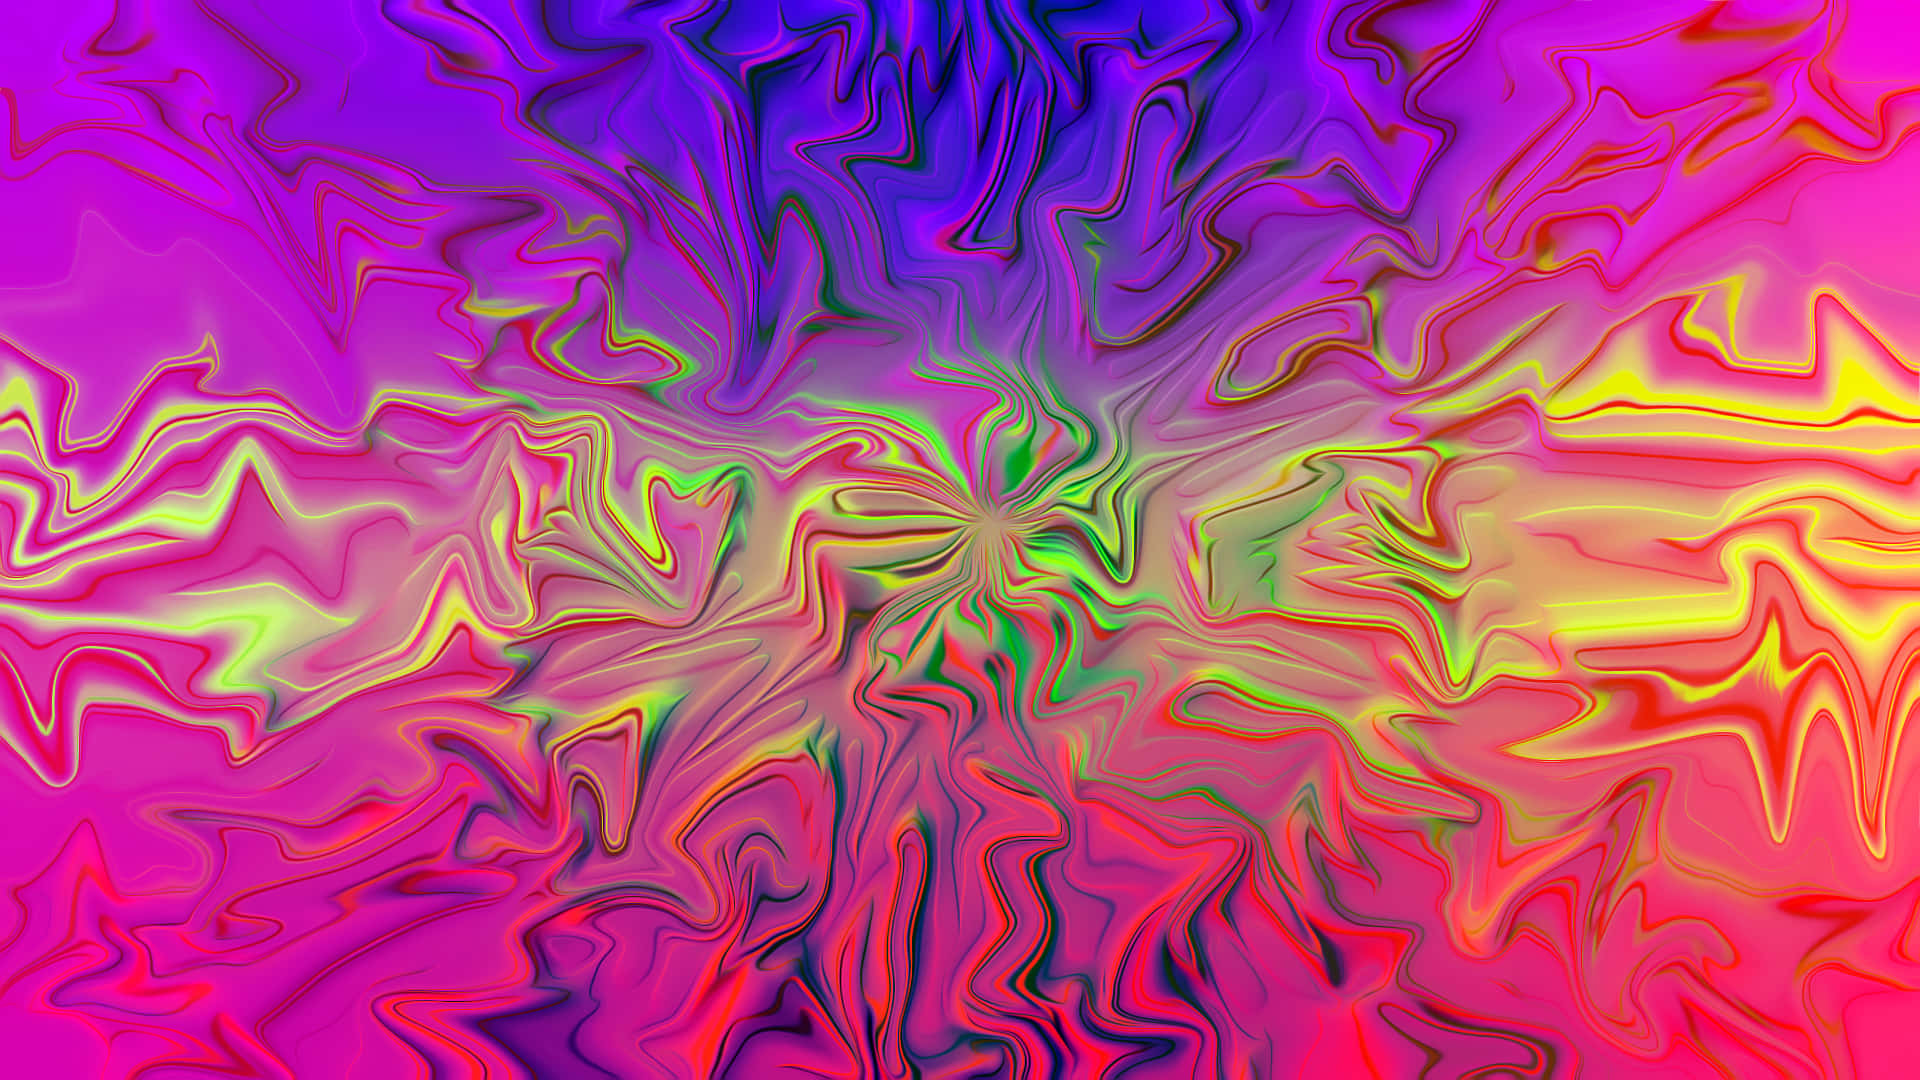 A Colorful Abstract Background With Swirls